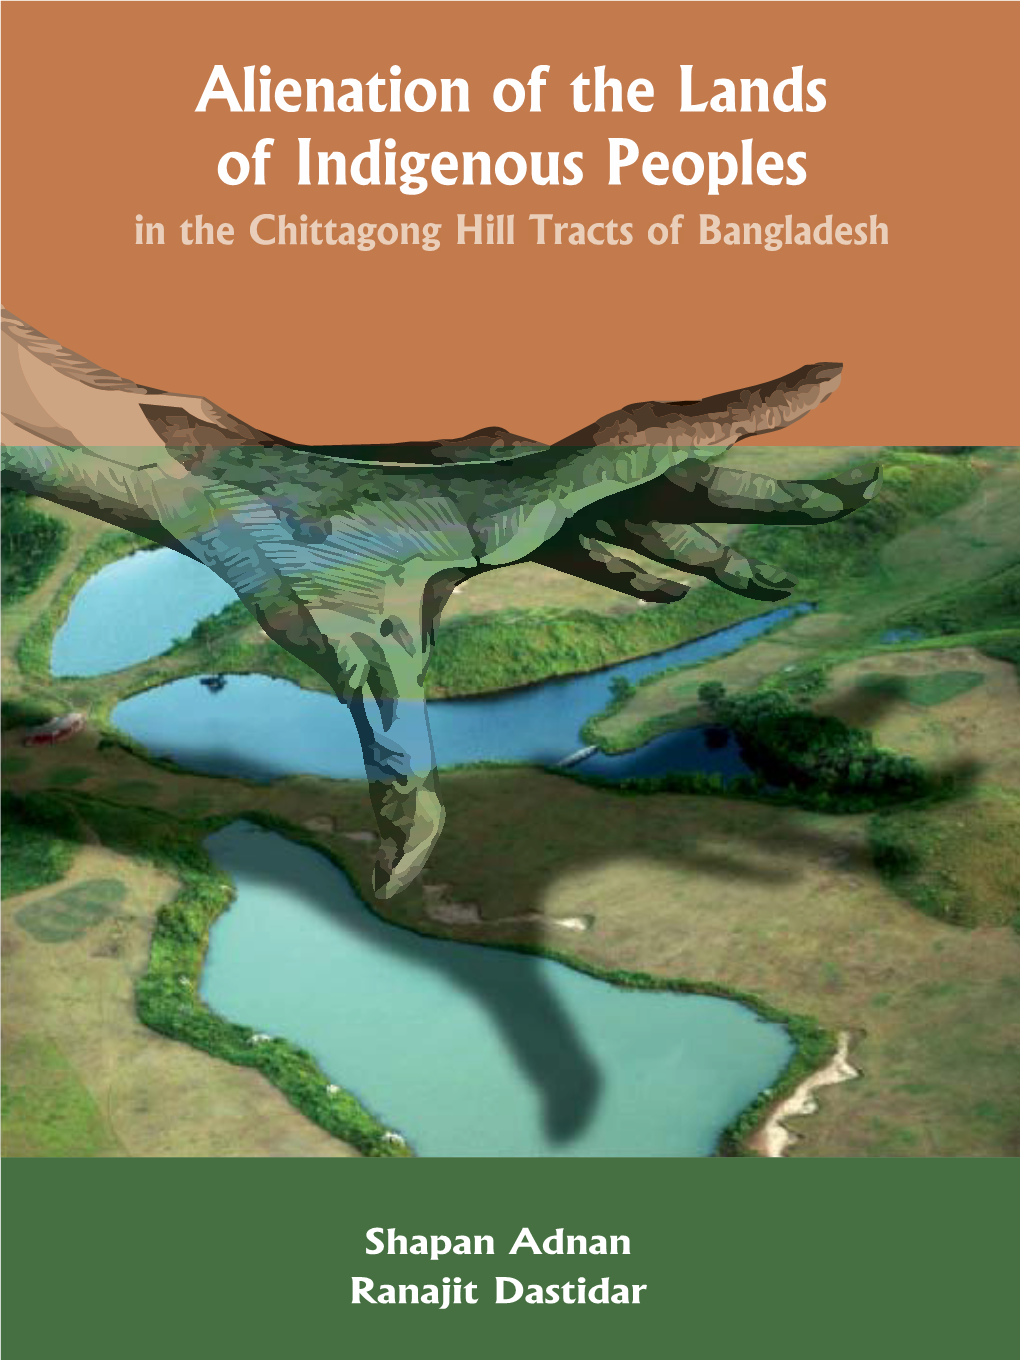 Alienation of the Lands of Indigenous Peoples in the Chittagong Hill Tracts of Bangladesh